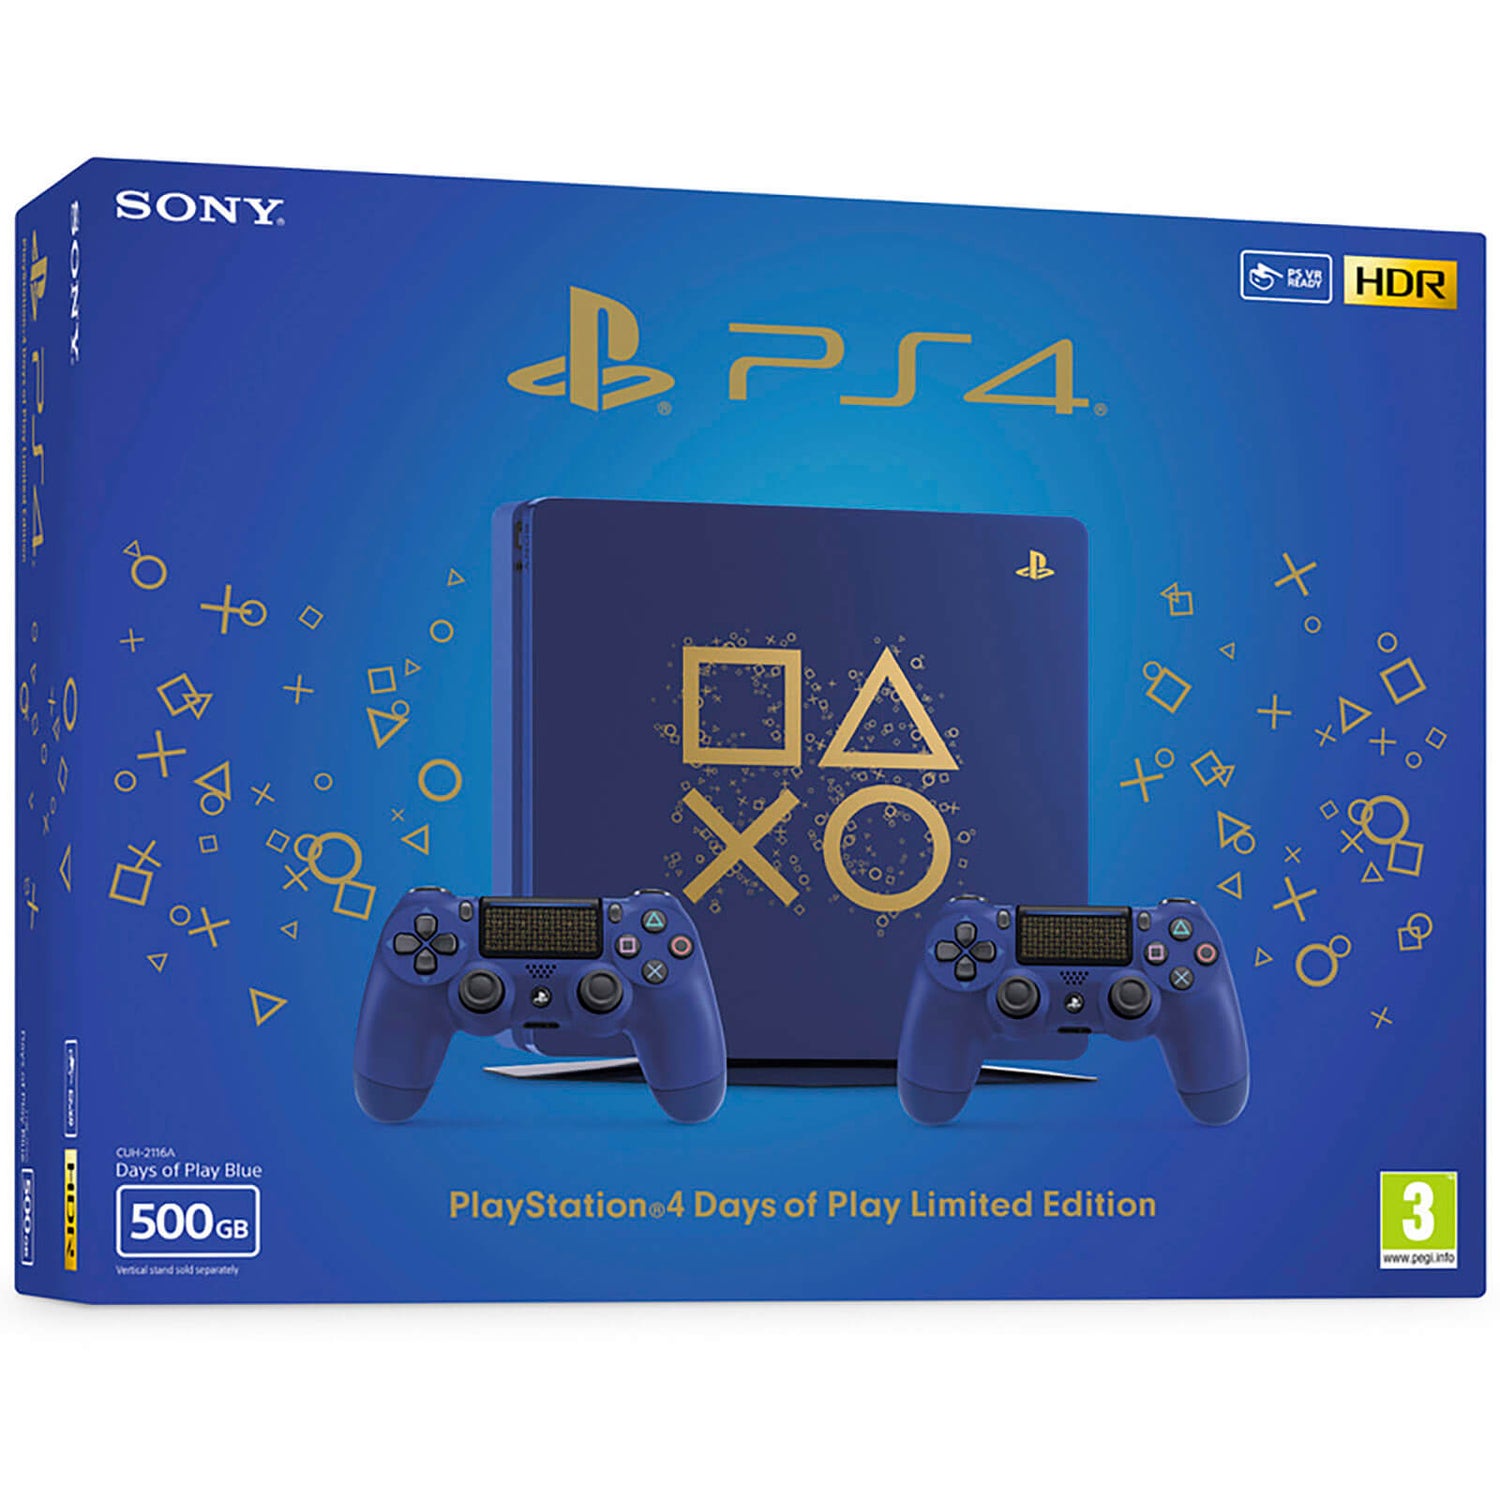 PS4: New Sony PlayStation 4 500GB Console - Includes Battlefield 4 Games  Consoles - Zavvi US